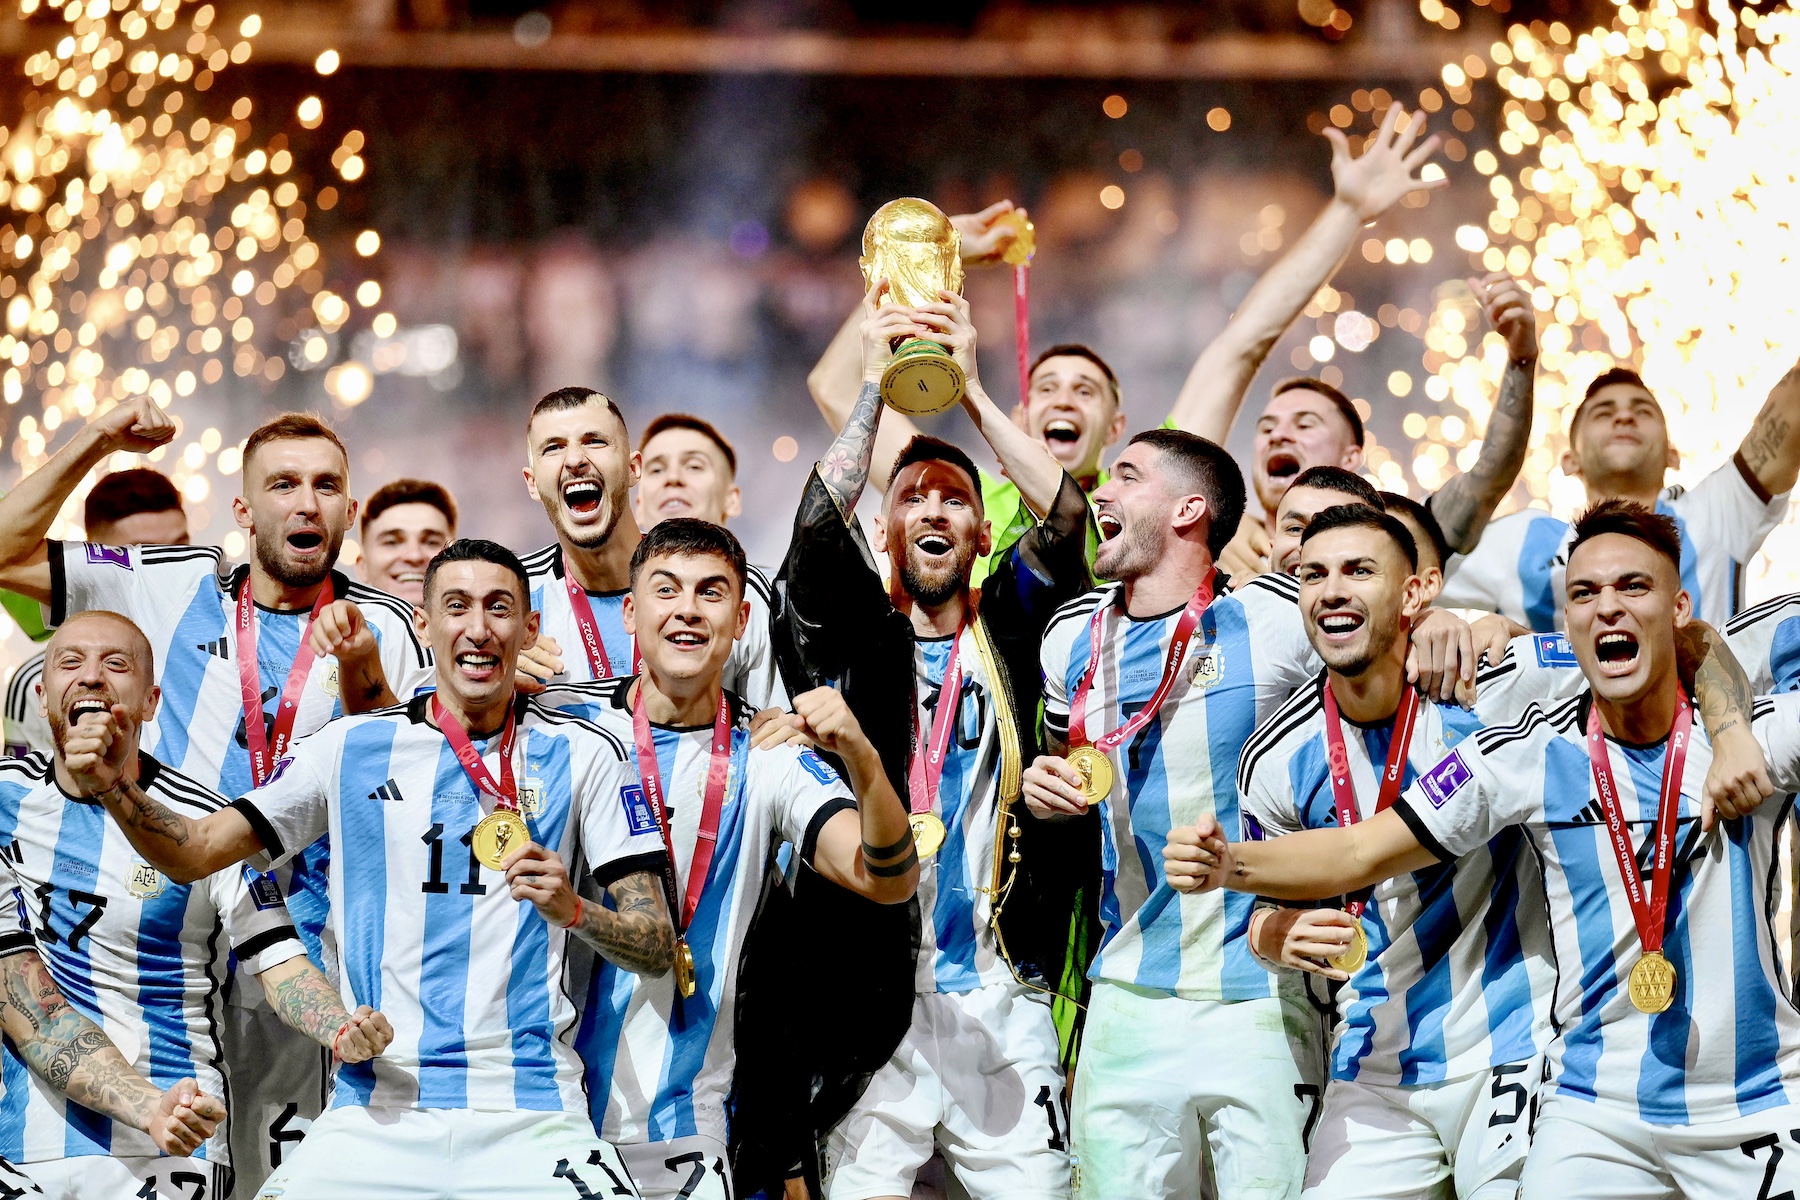 In One Of The Most Dramatic Finals, Argentina Beat France 4-2 In A Shootout To Win The World Cup